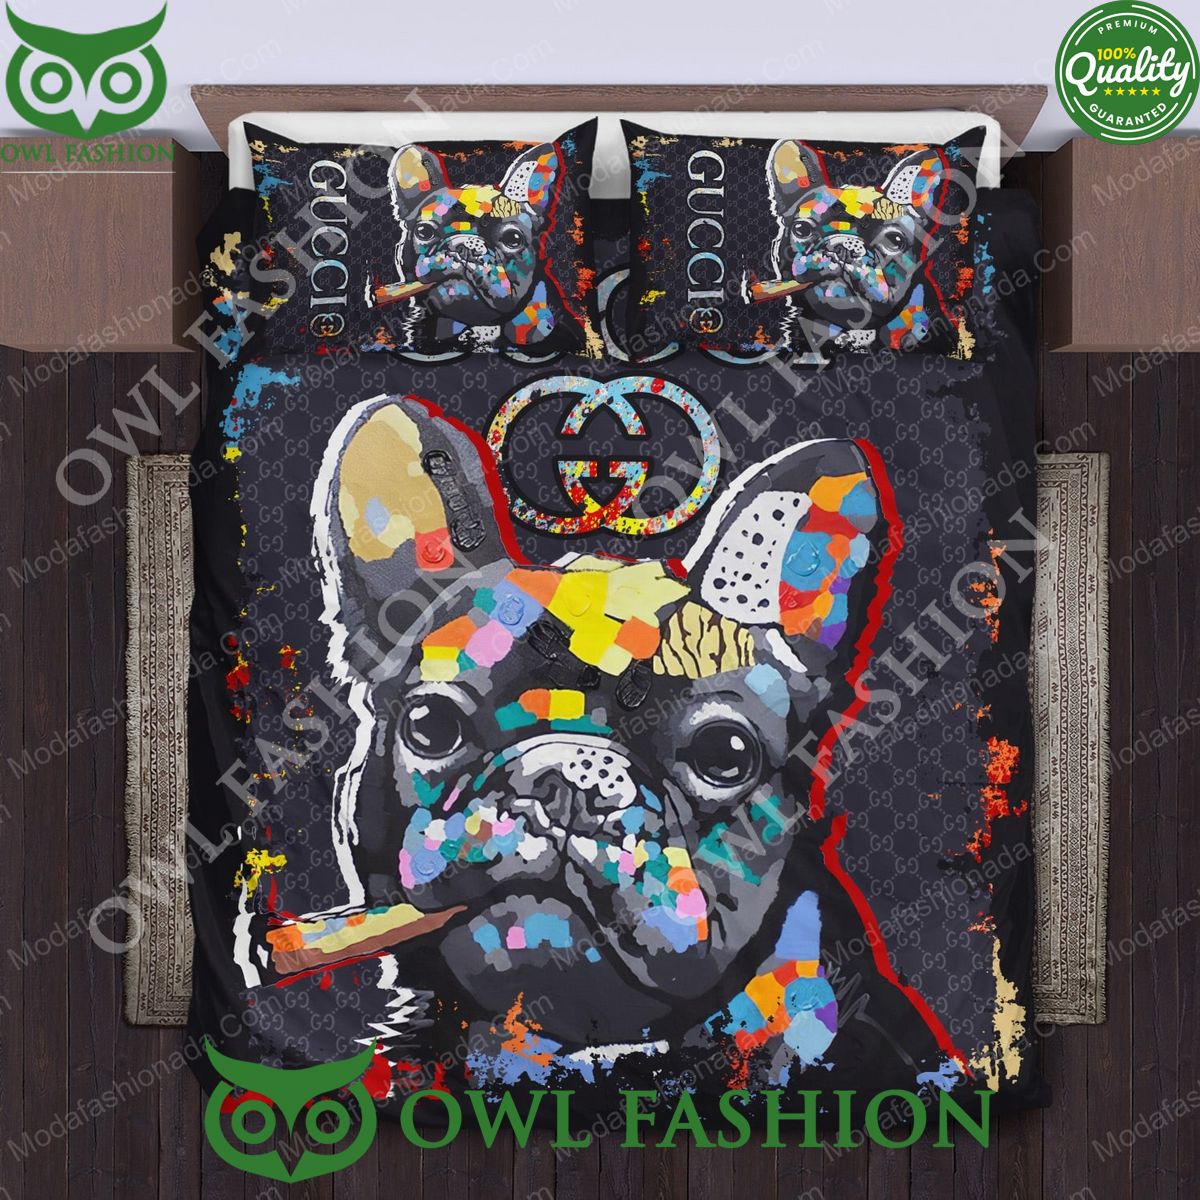 Gucci Bulldogs Smoking Cigars Bedding Sets Eye soothing picture dear